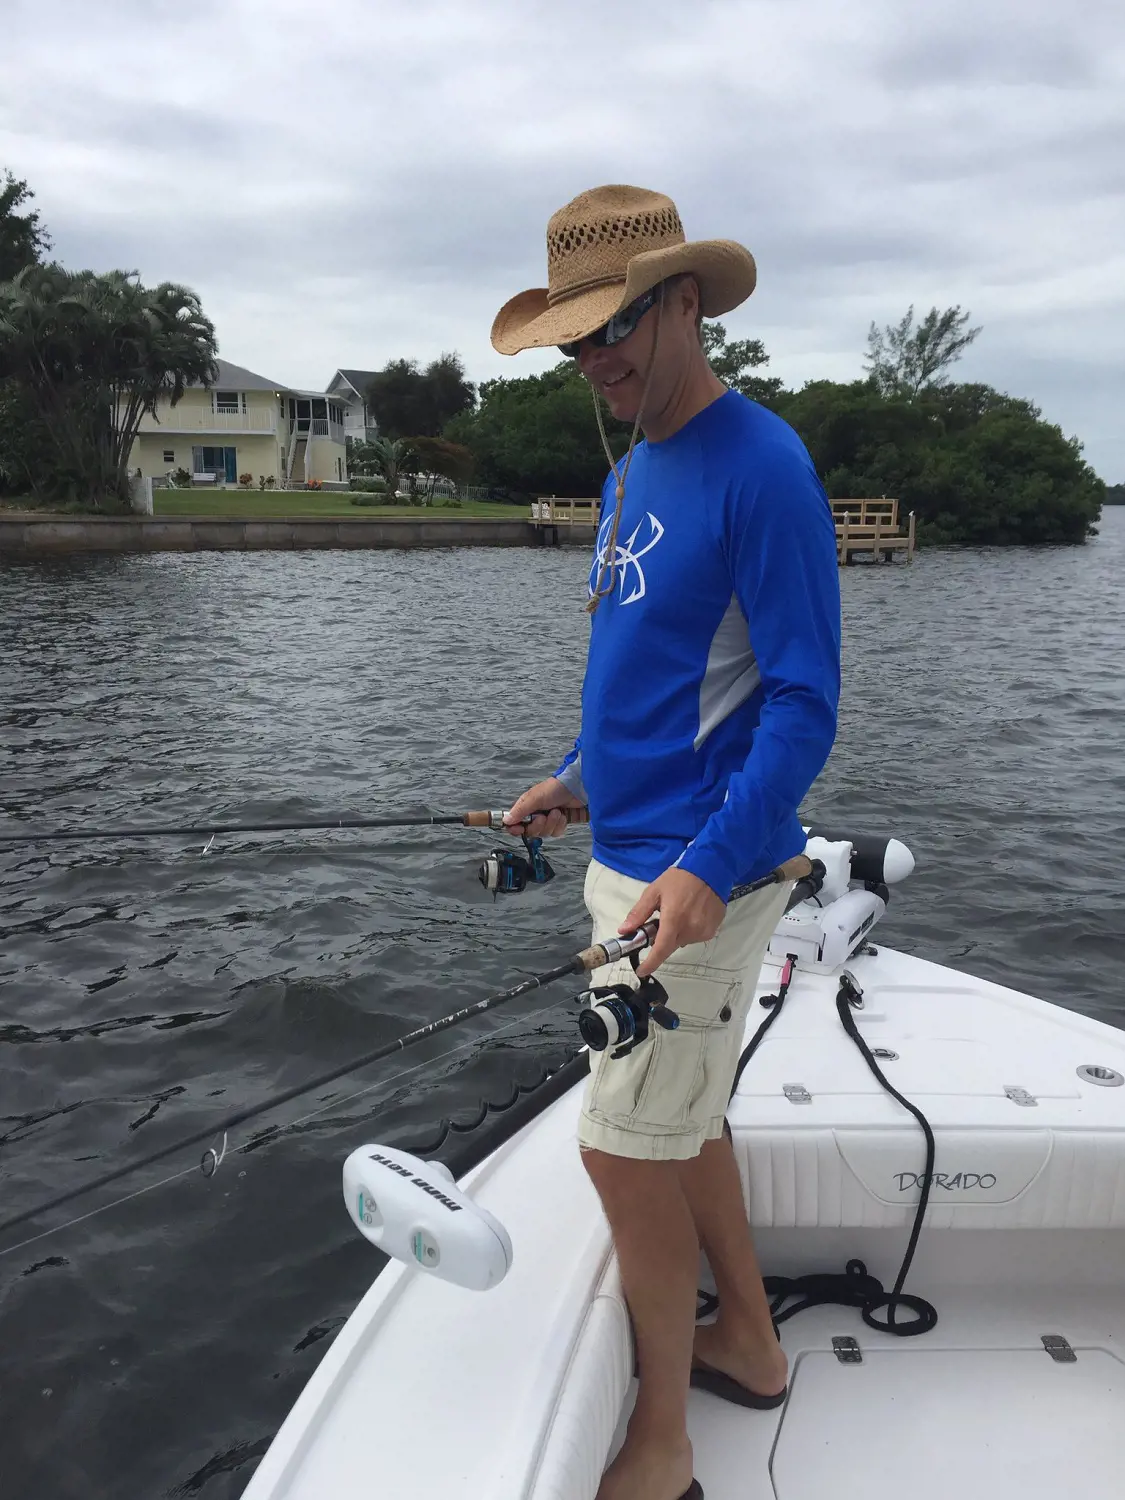 Successful head coach of the Lightning enjoying fishing, with two fishing lines promoting annual event 